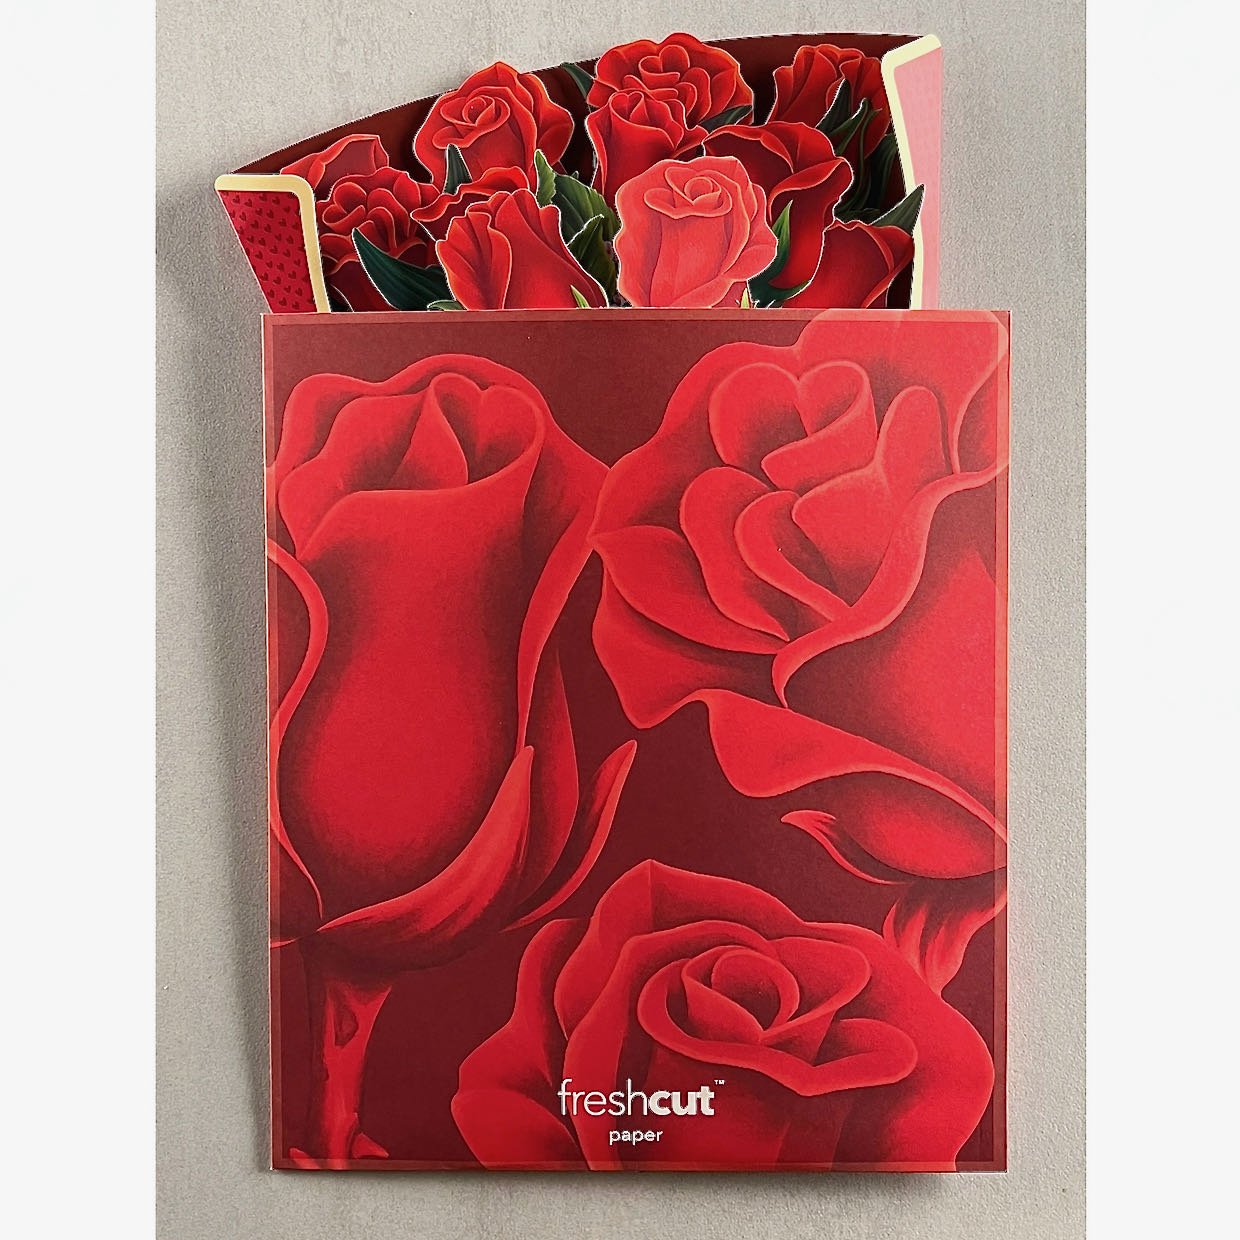 3D Life-Sized Paper Red Roses Bouquet Pop Up Greeting Card - Marmalade Mercantile